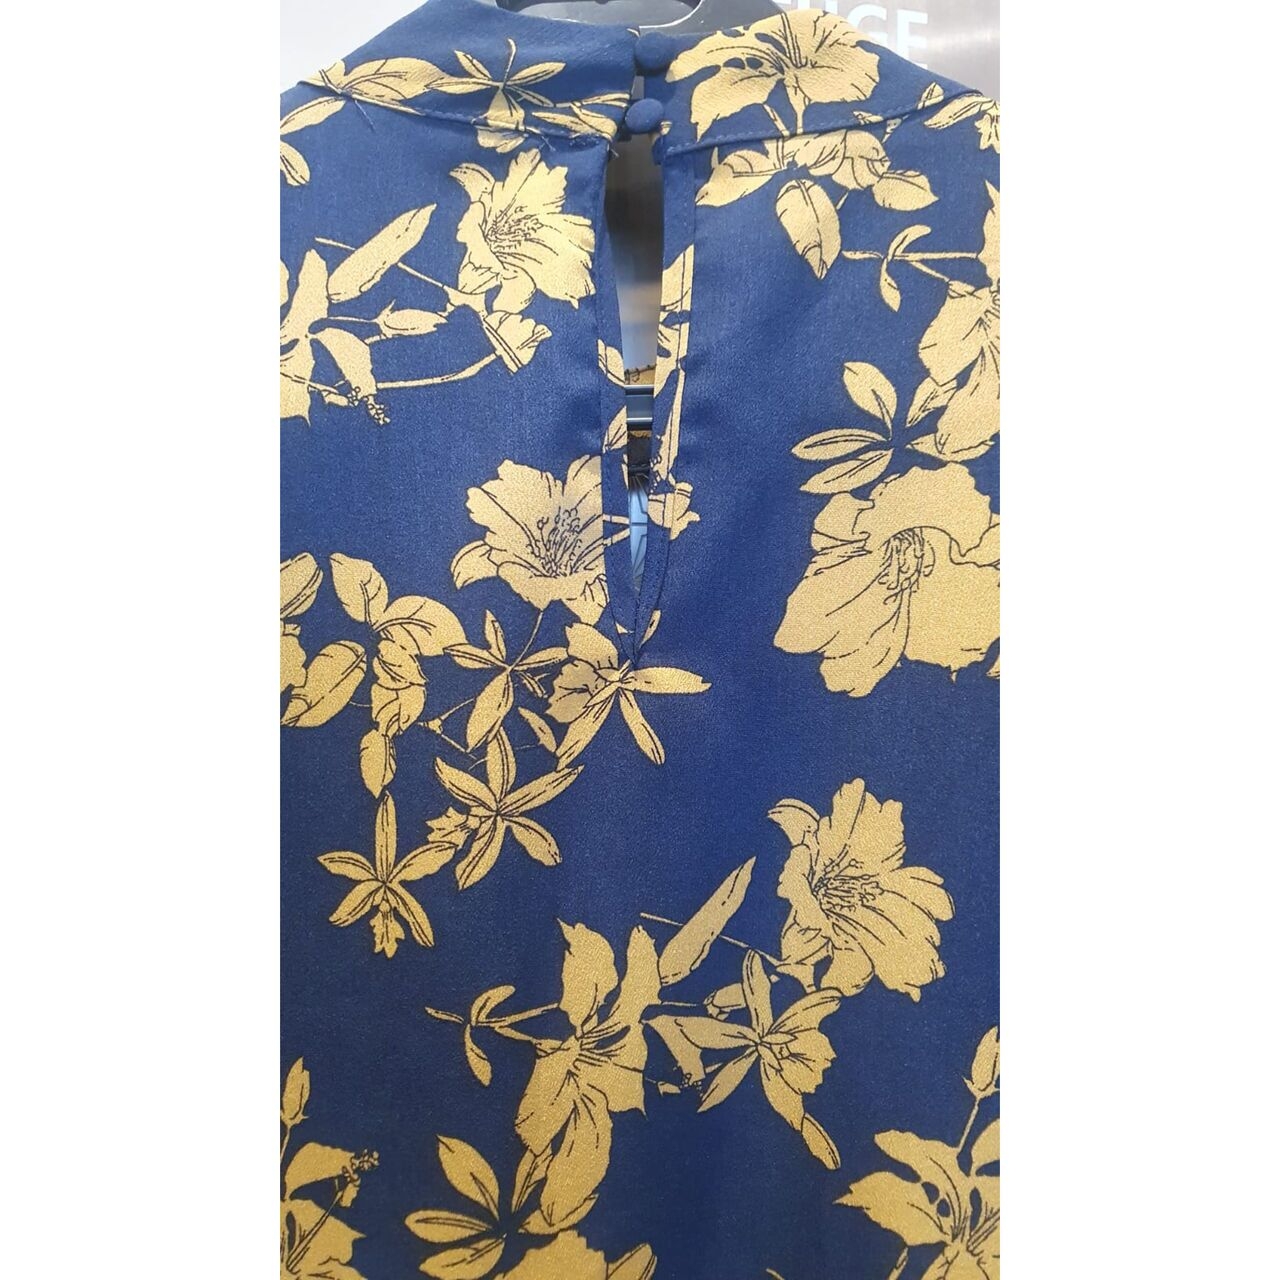 Pomelo. Navy & Yellow Floral Blouse